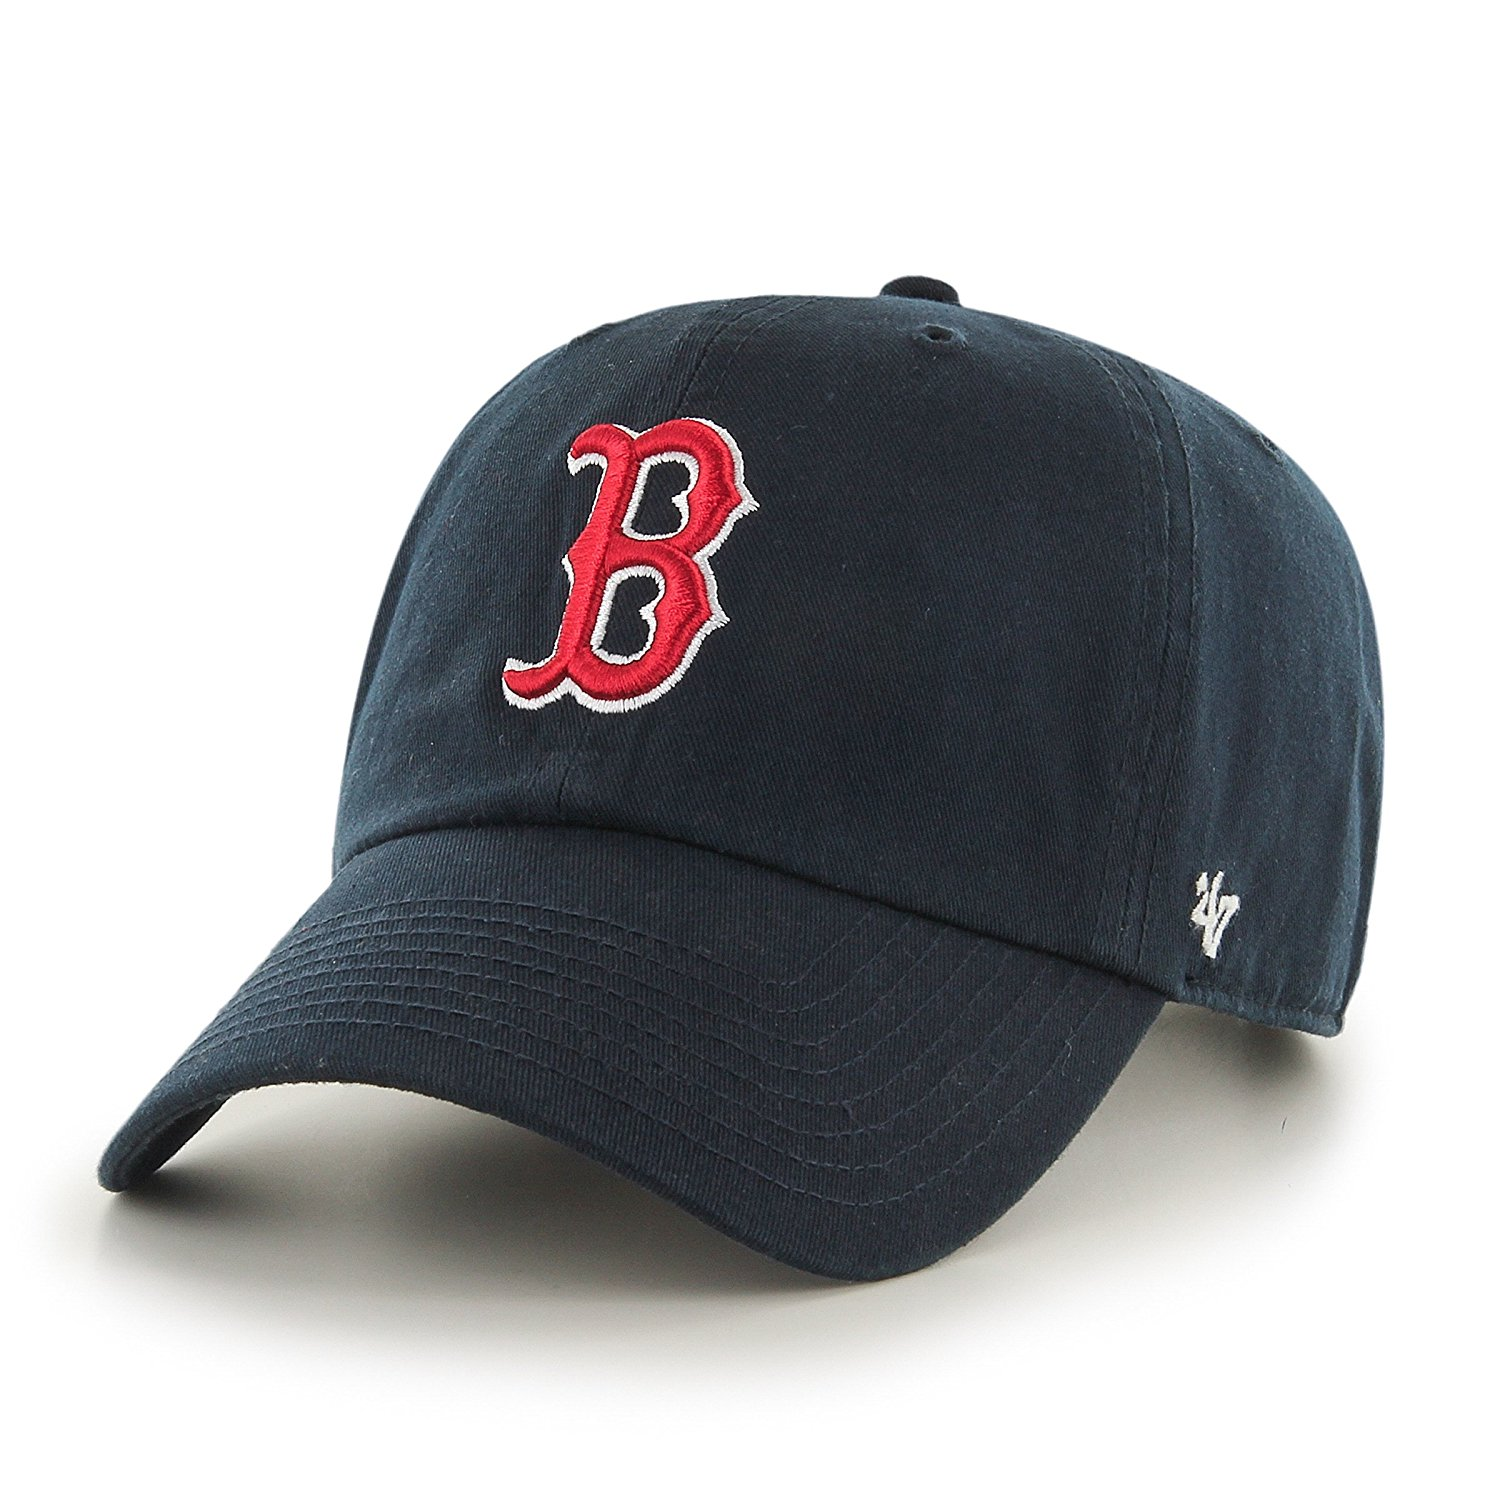 Baseball season is winding to a close. Most teams have been eliminated from playoff contention, but a certain Boston team hasn't. Wanna join the bandwagon?<br><br> A Red Sox ball cap is up for purchase <a href="https://amzn.to/2znRwLZ" "nofollow" target="_blank">here</a>.